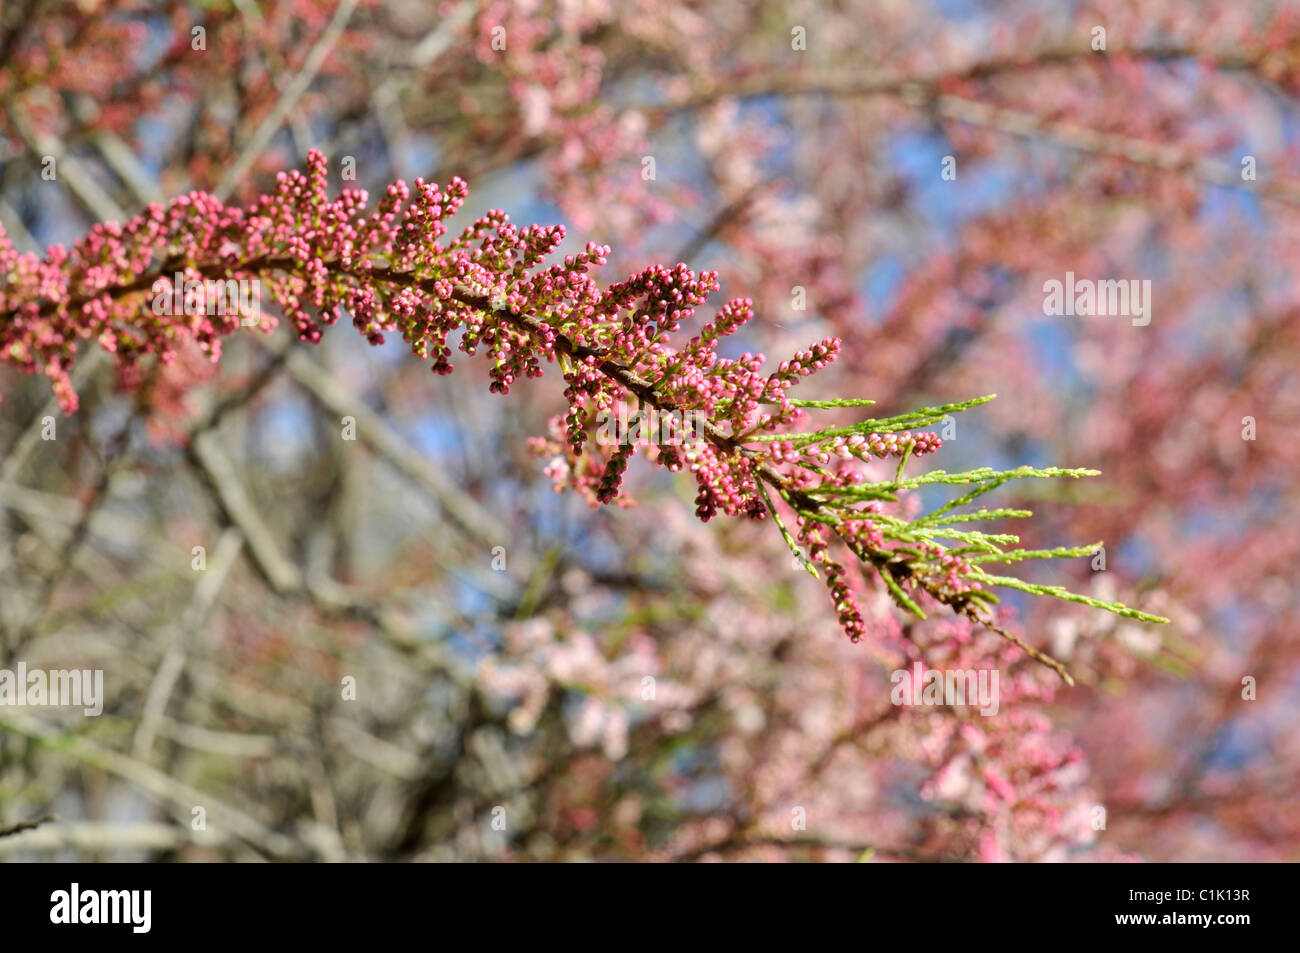 Tamarisk branch with flowers and leaves Stock Photo